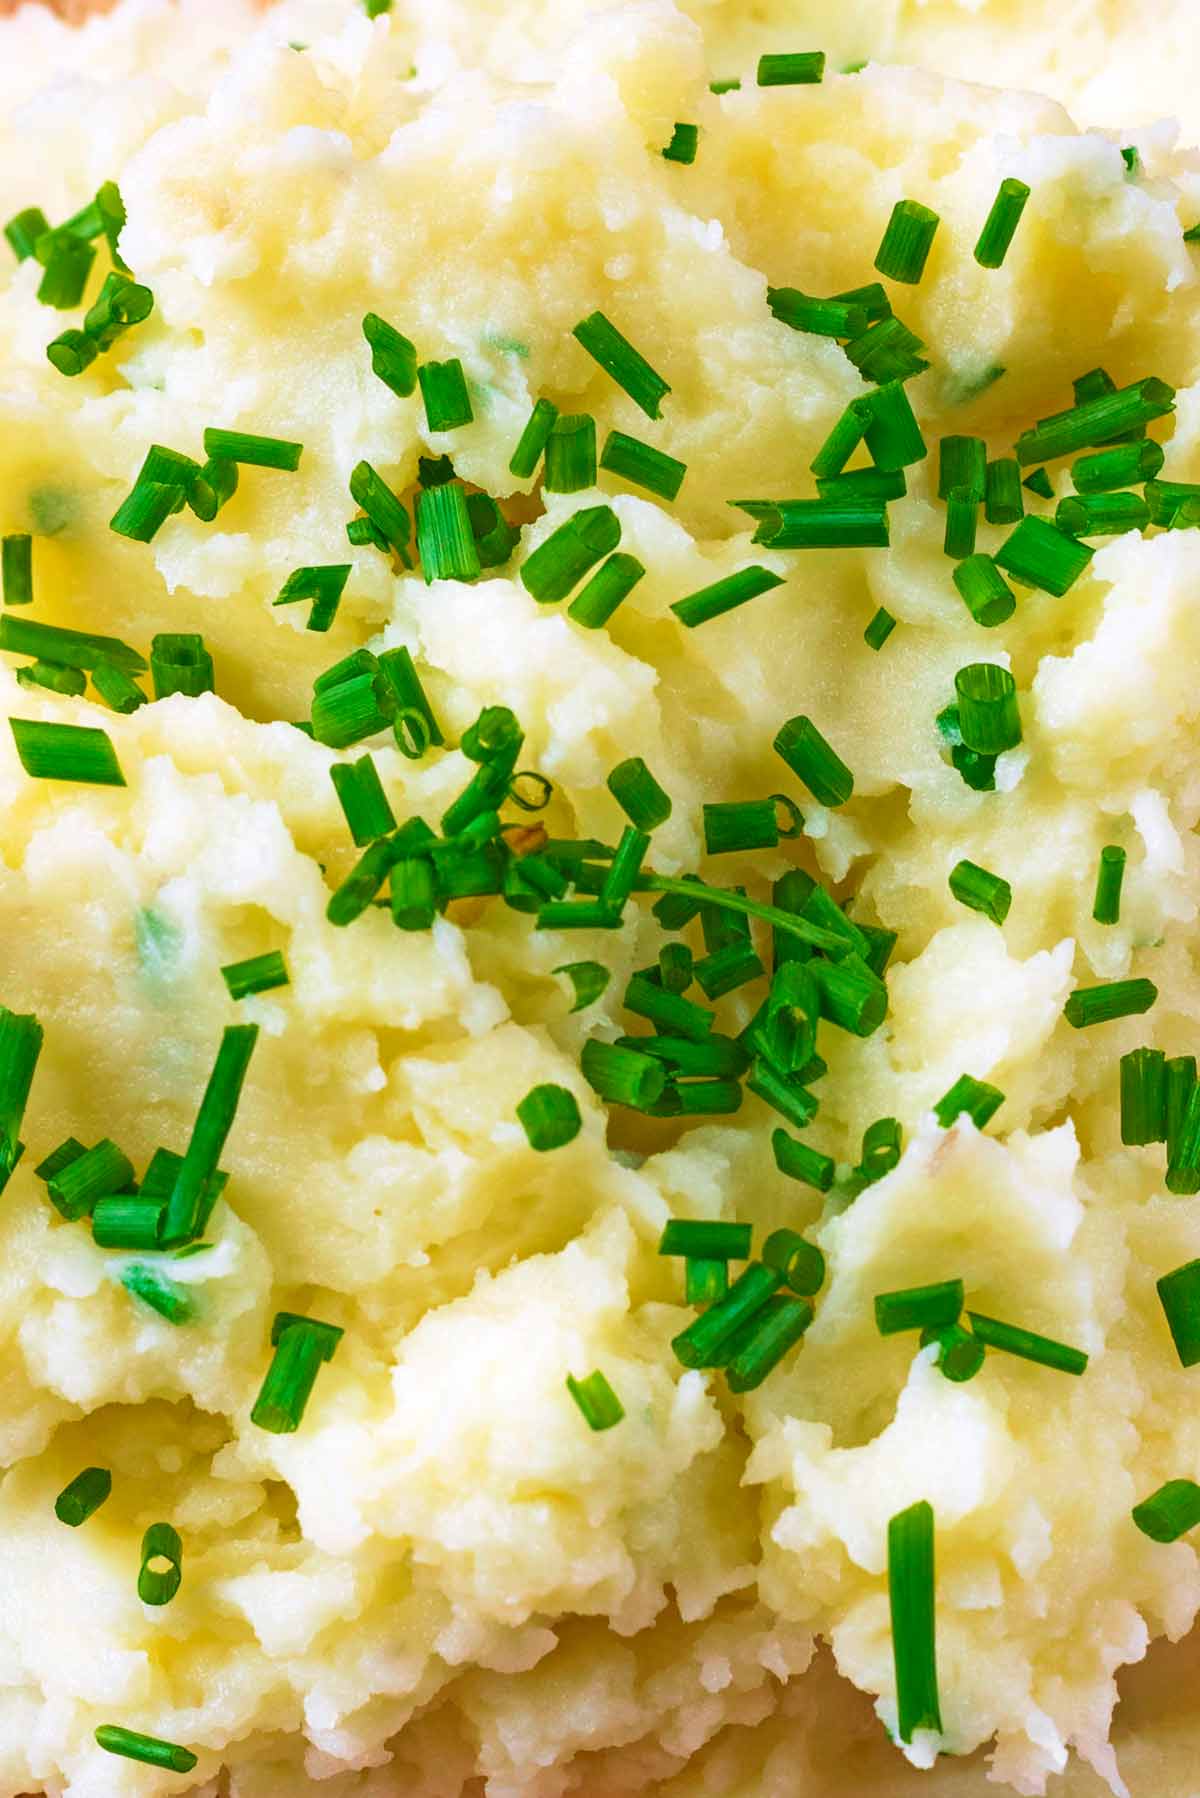 Chopped chives on the top of mashed potato.